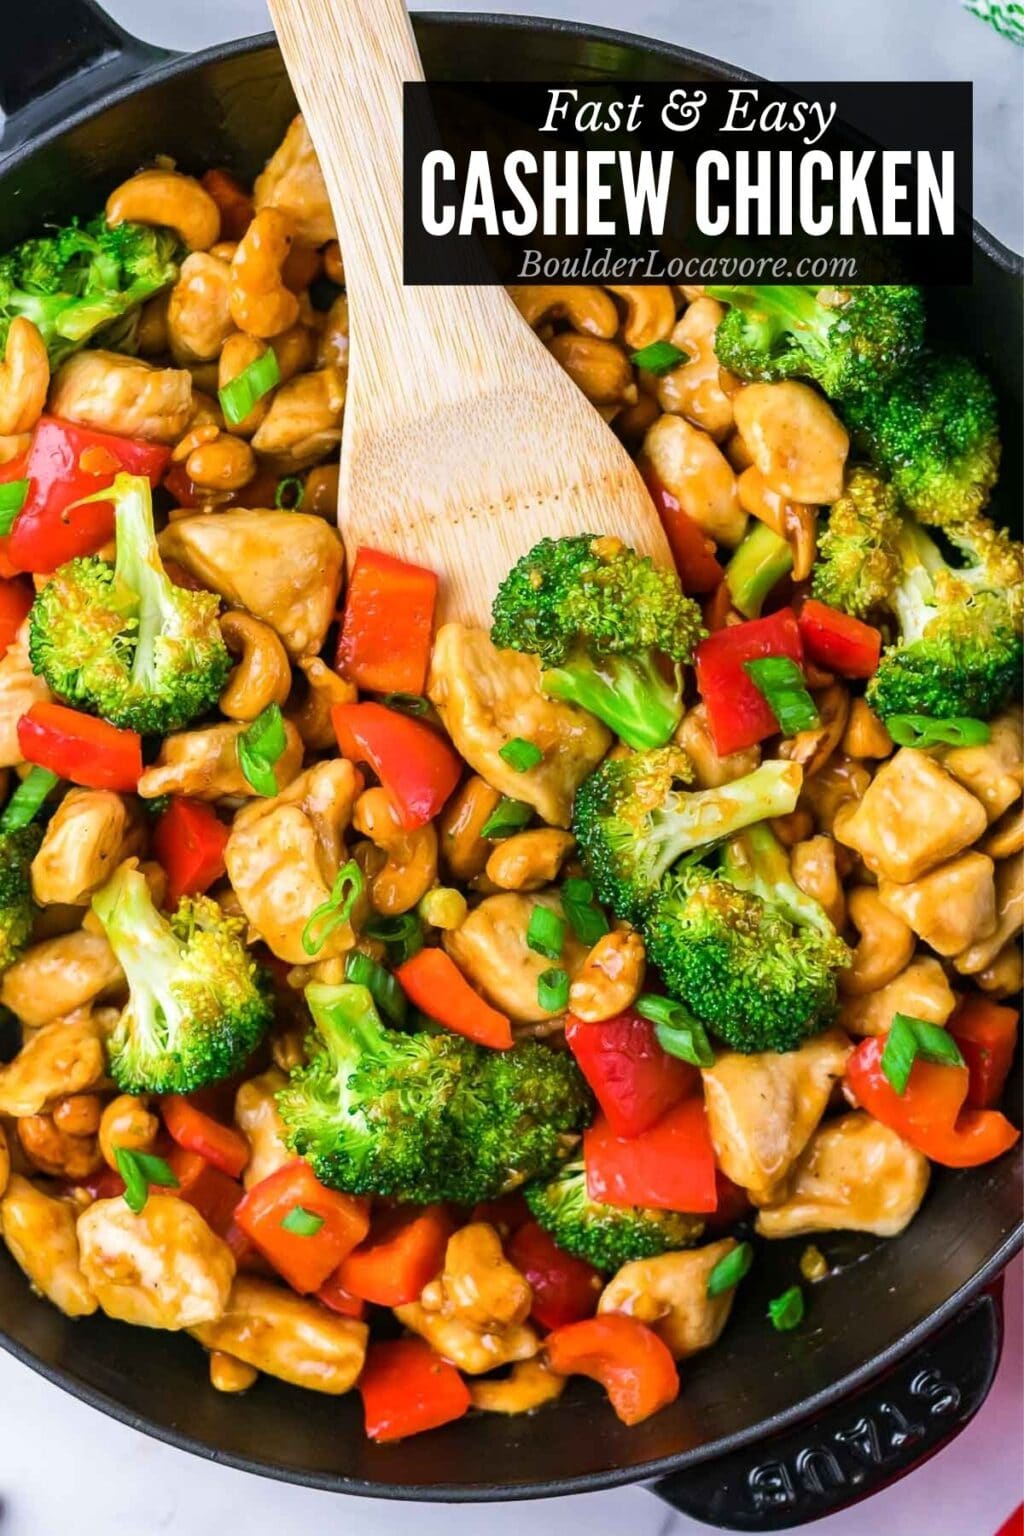 Cashew Chicken Recipe - Fast 'Take-Out' at Home! - Boulder Locavore®